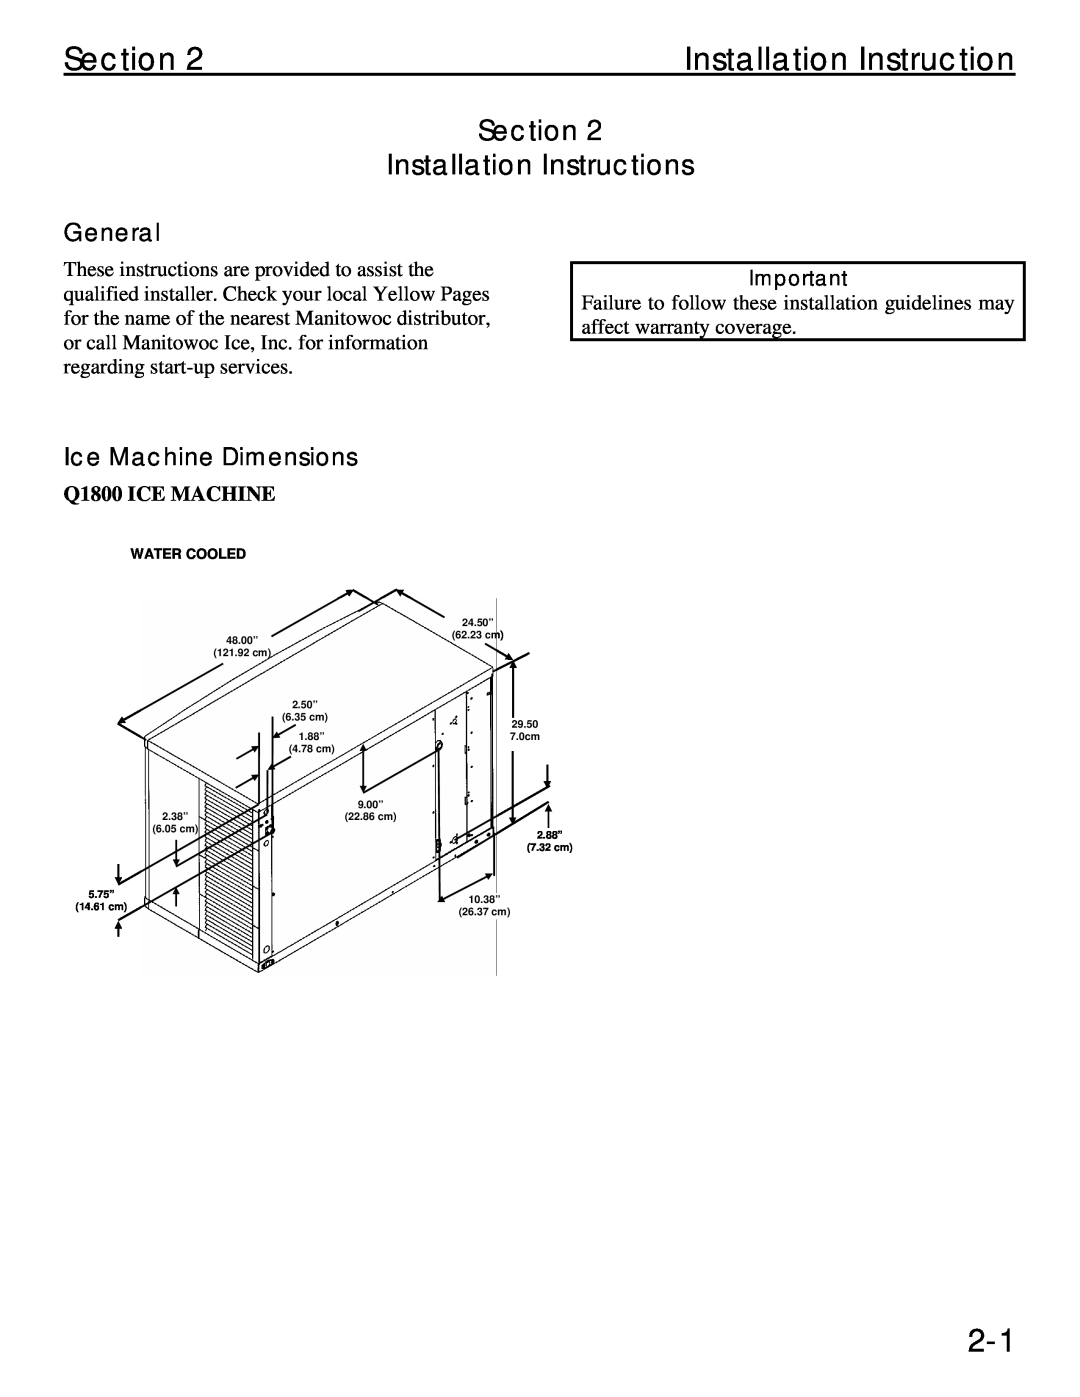 Manitowoc Ice Q 1800 manual Section Installation Instructions, General, Ice Machine Dimensions, Q1800 ICE MACHINE 